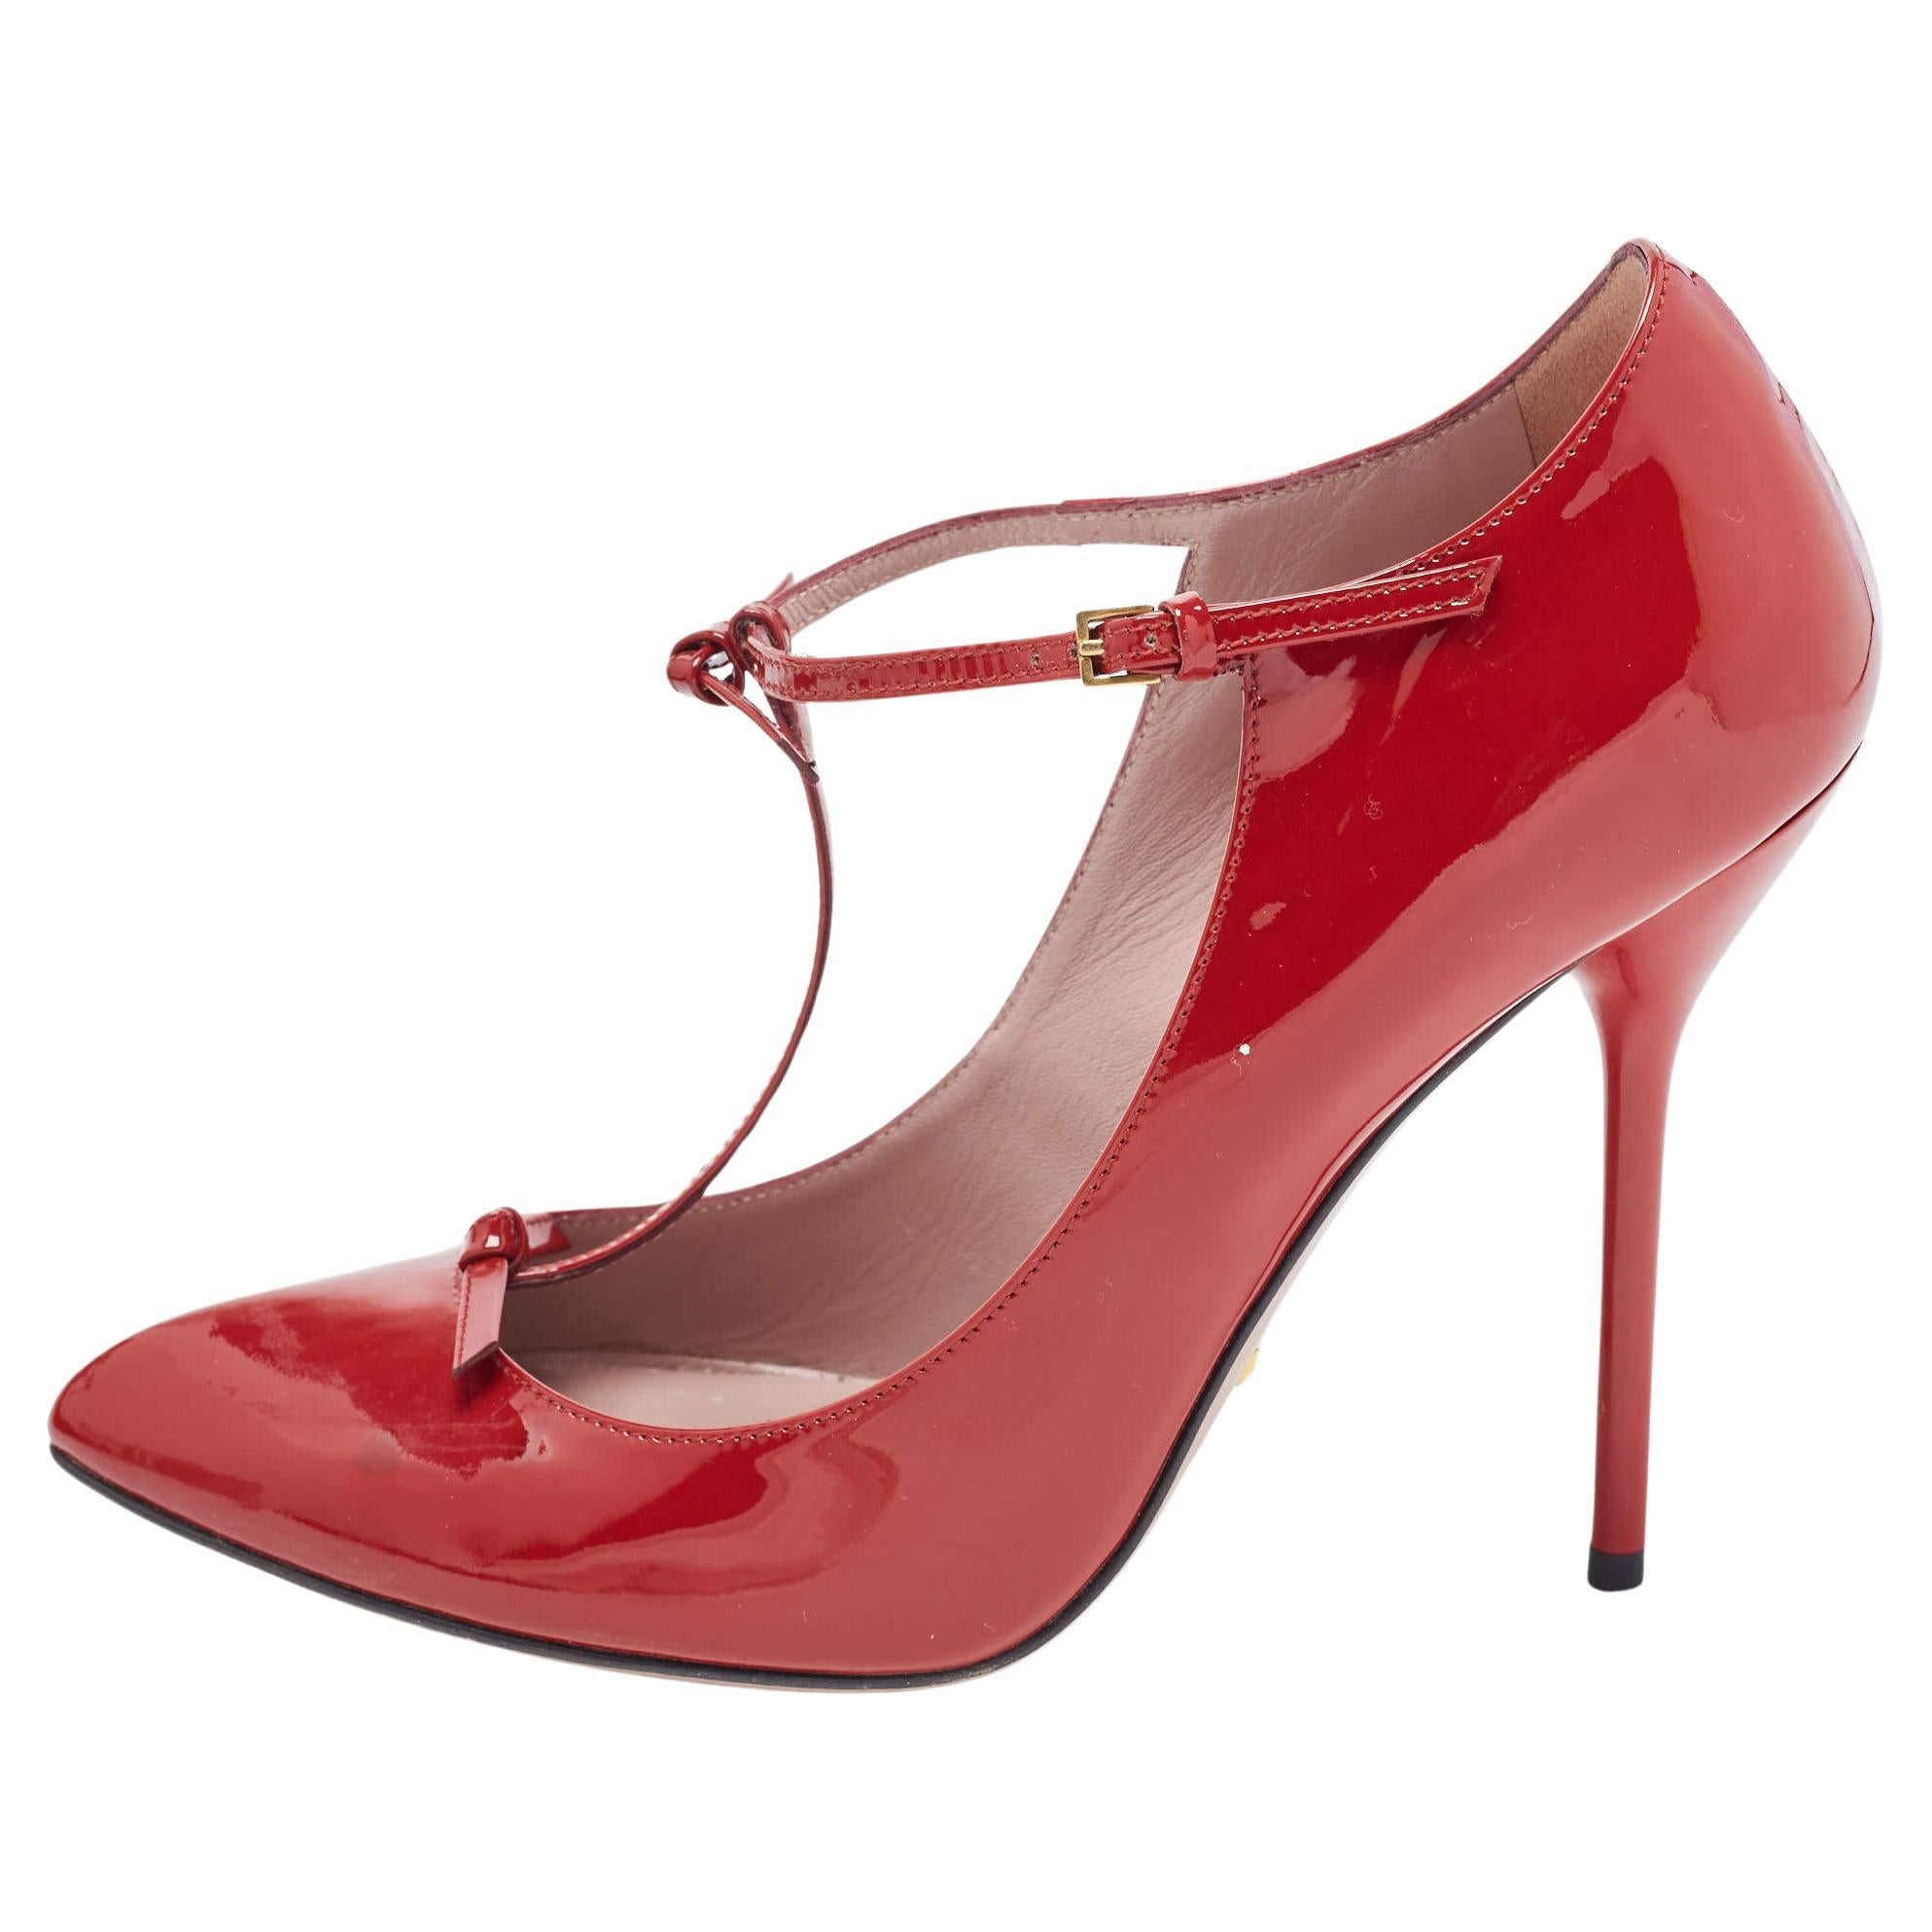 Gucci Red Patent Leather Bow Accents T-Strap Pumps Size 38.5